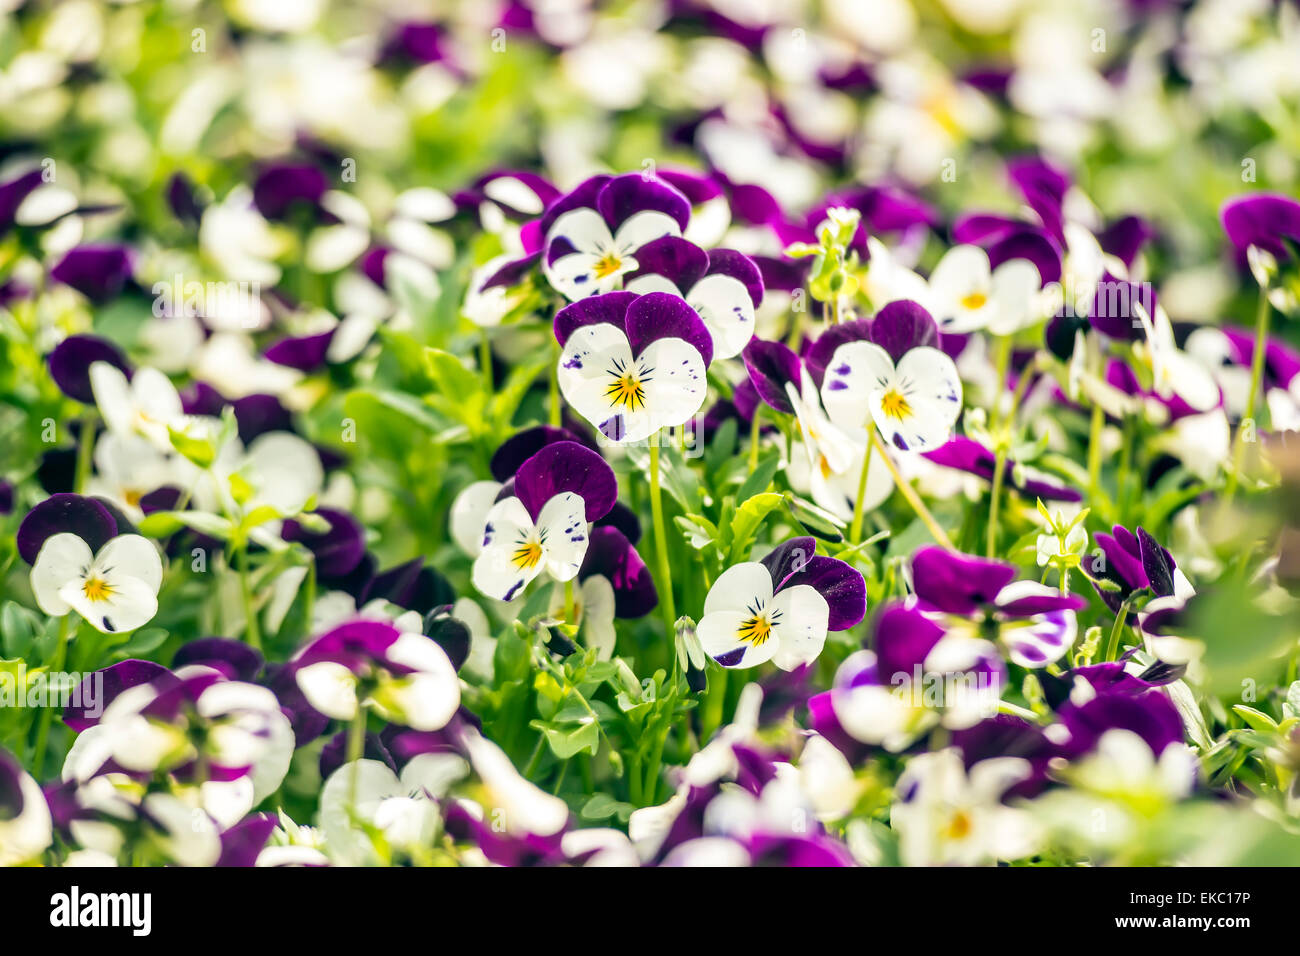 Beautiful pansy flowers in garden Stock Photo